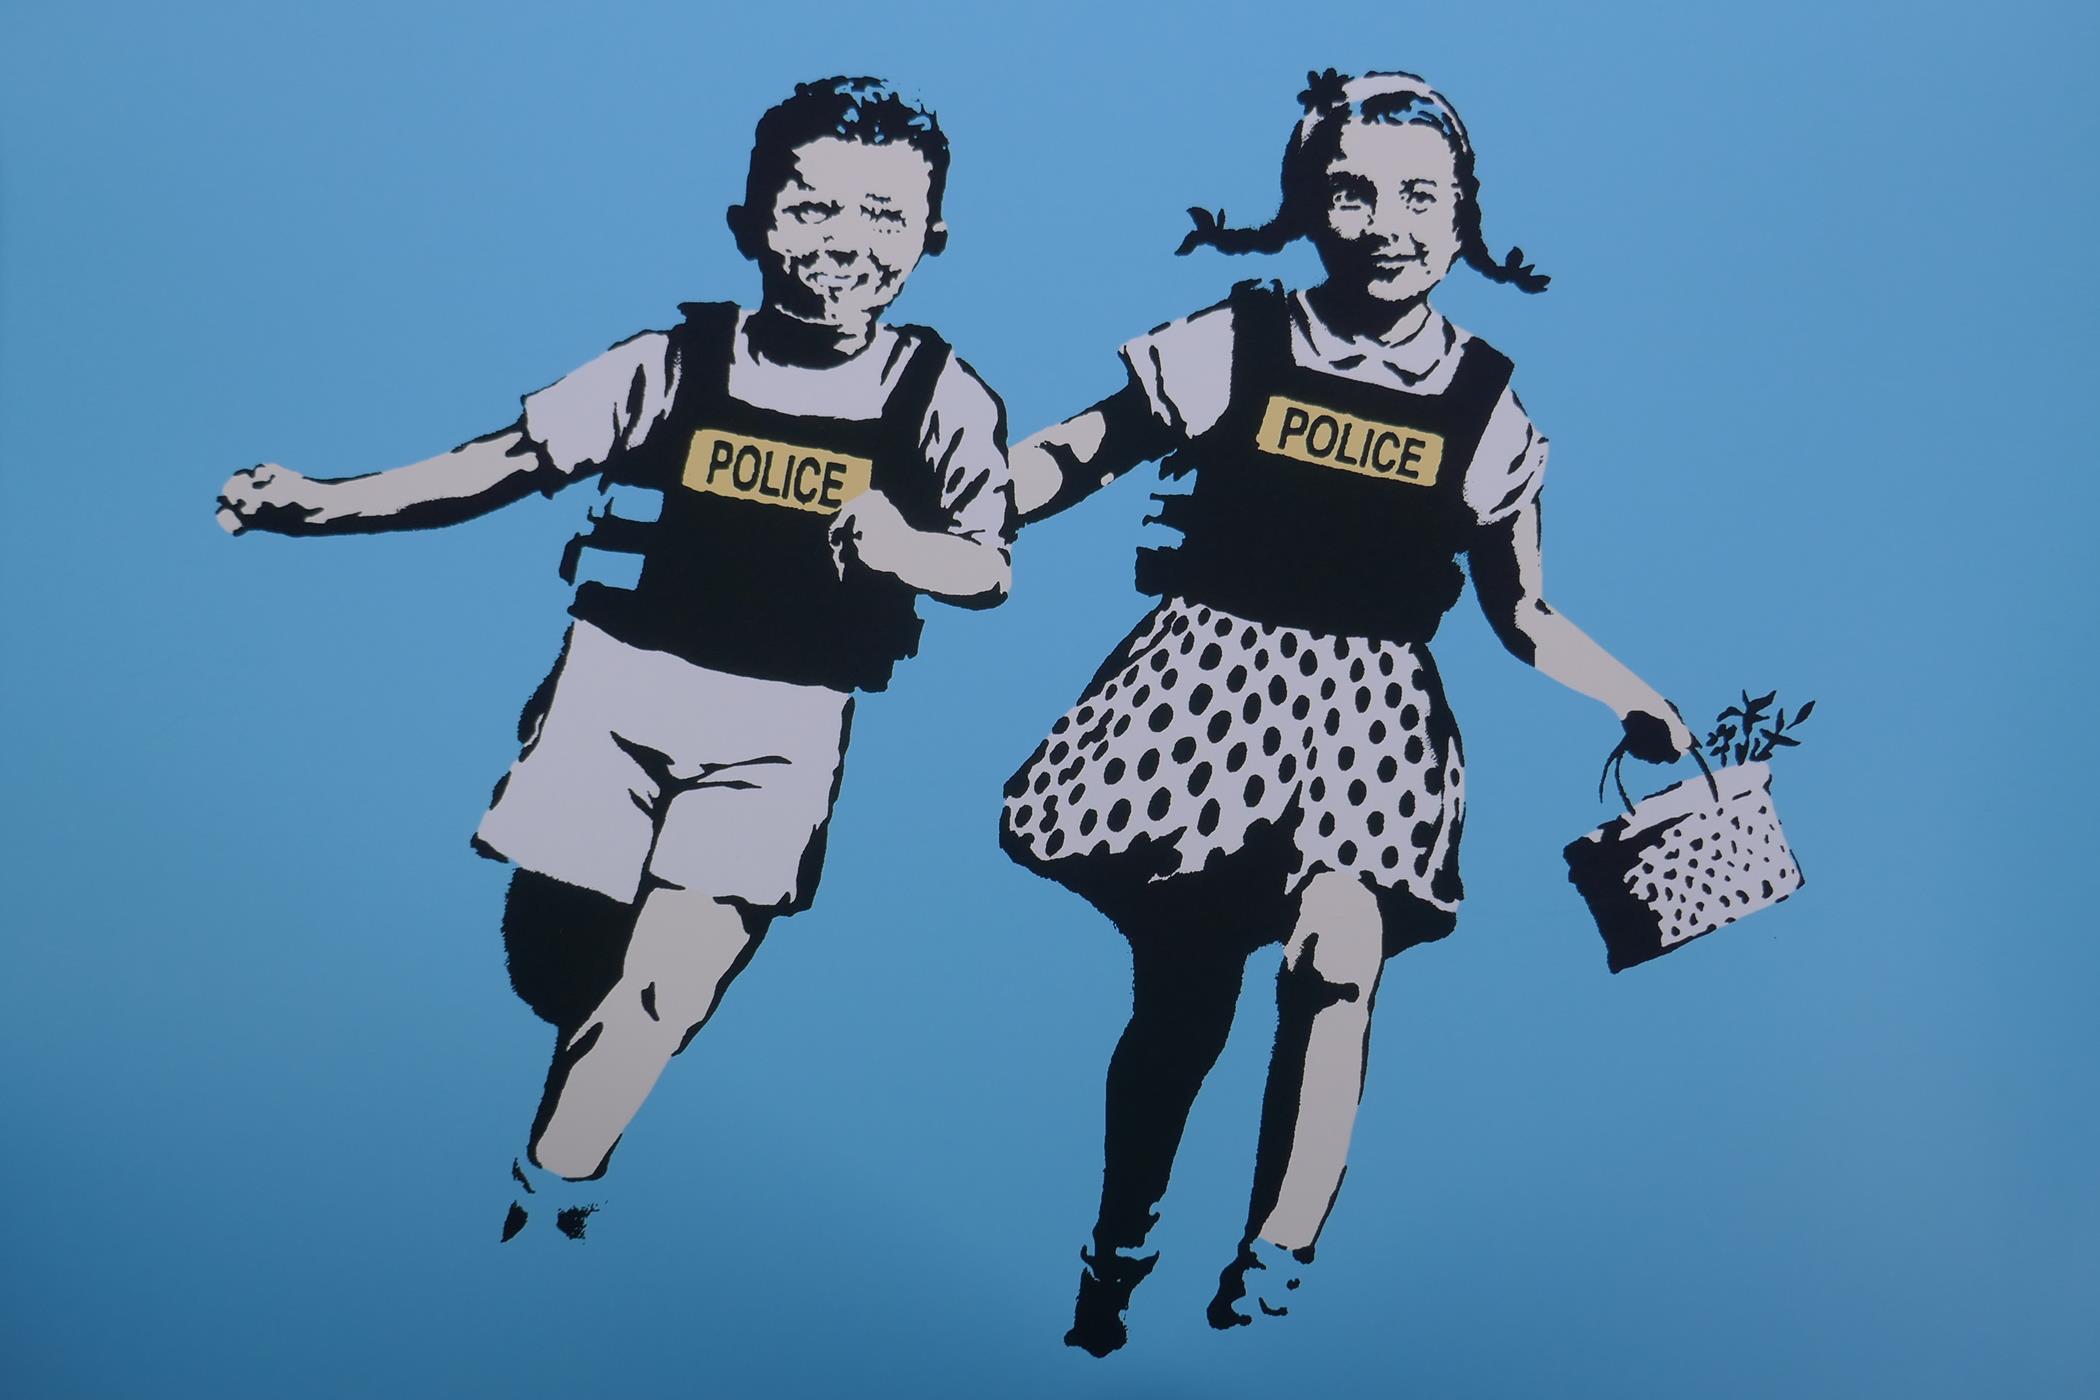 After Banksy, Jack & Jill (Police Kids) limited edition copy screen print, 290/500, by the West